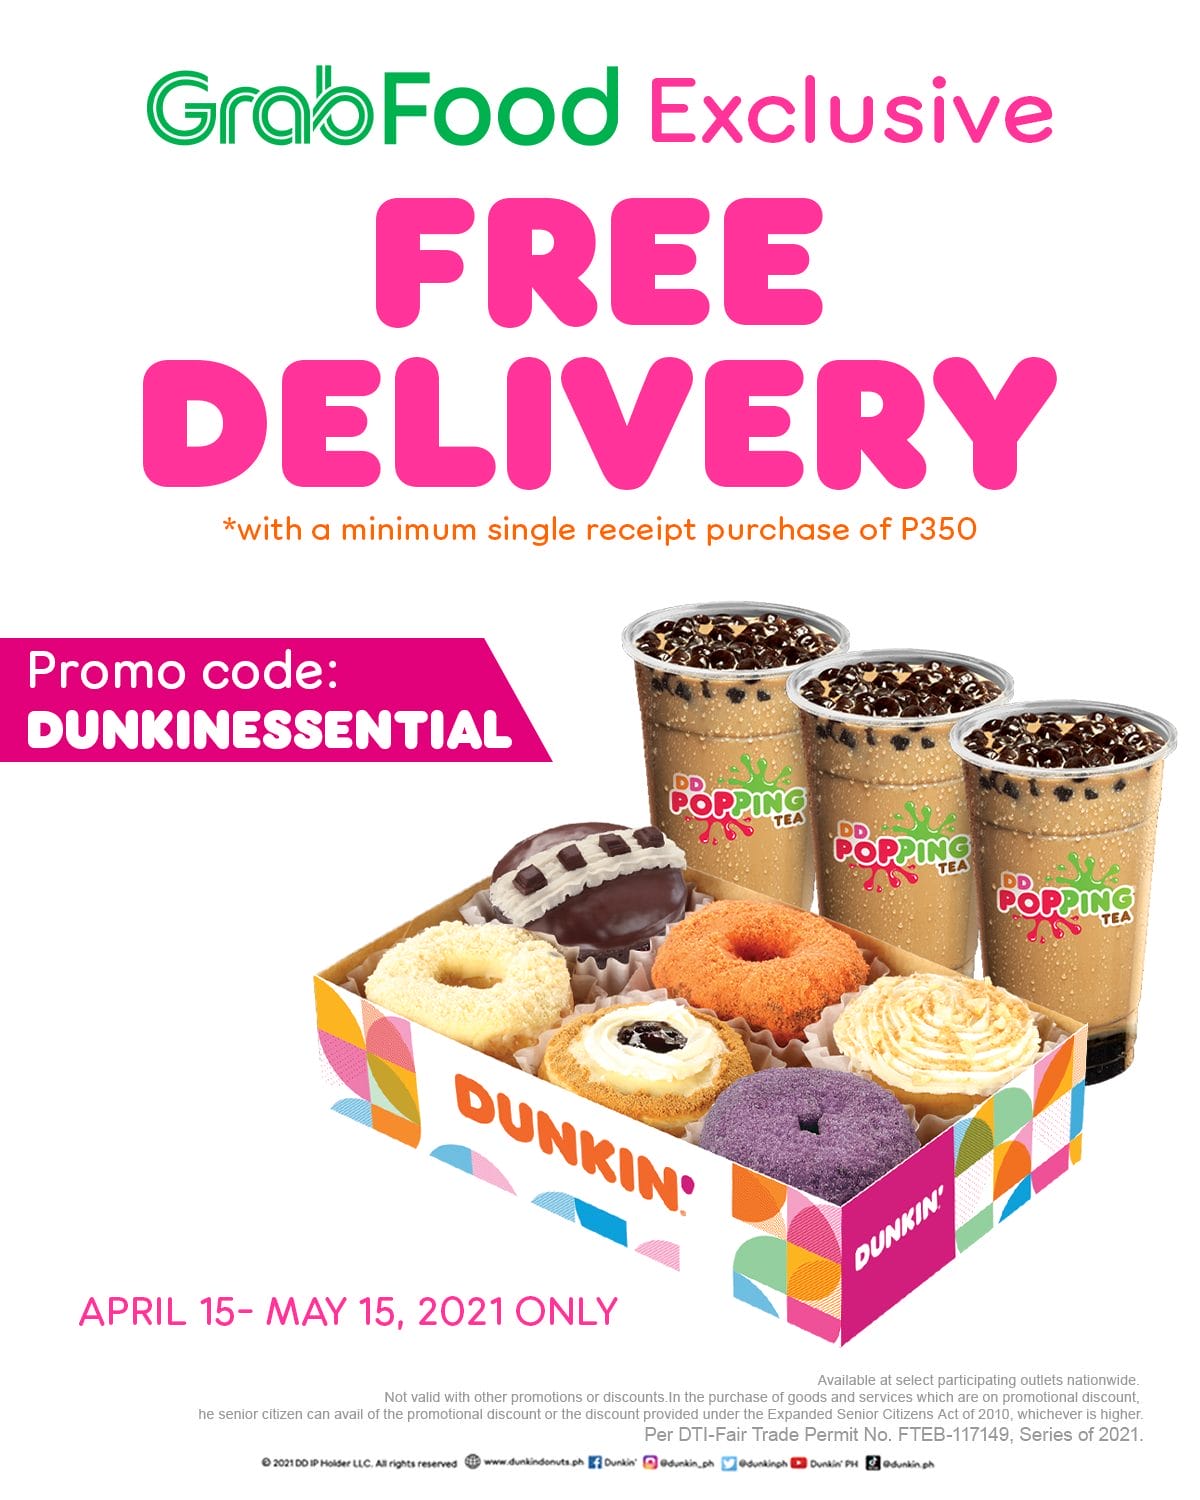 Dunkin Free Coffee Promo Code Dunkin Donuts Coupons Buy 6 Get 6 Promo